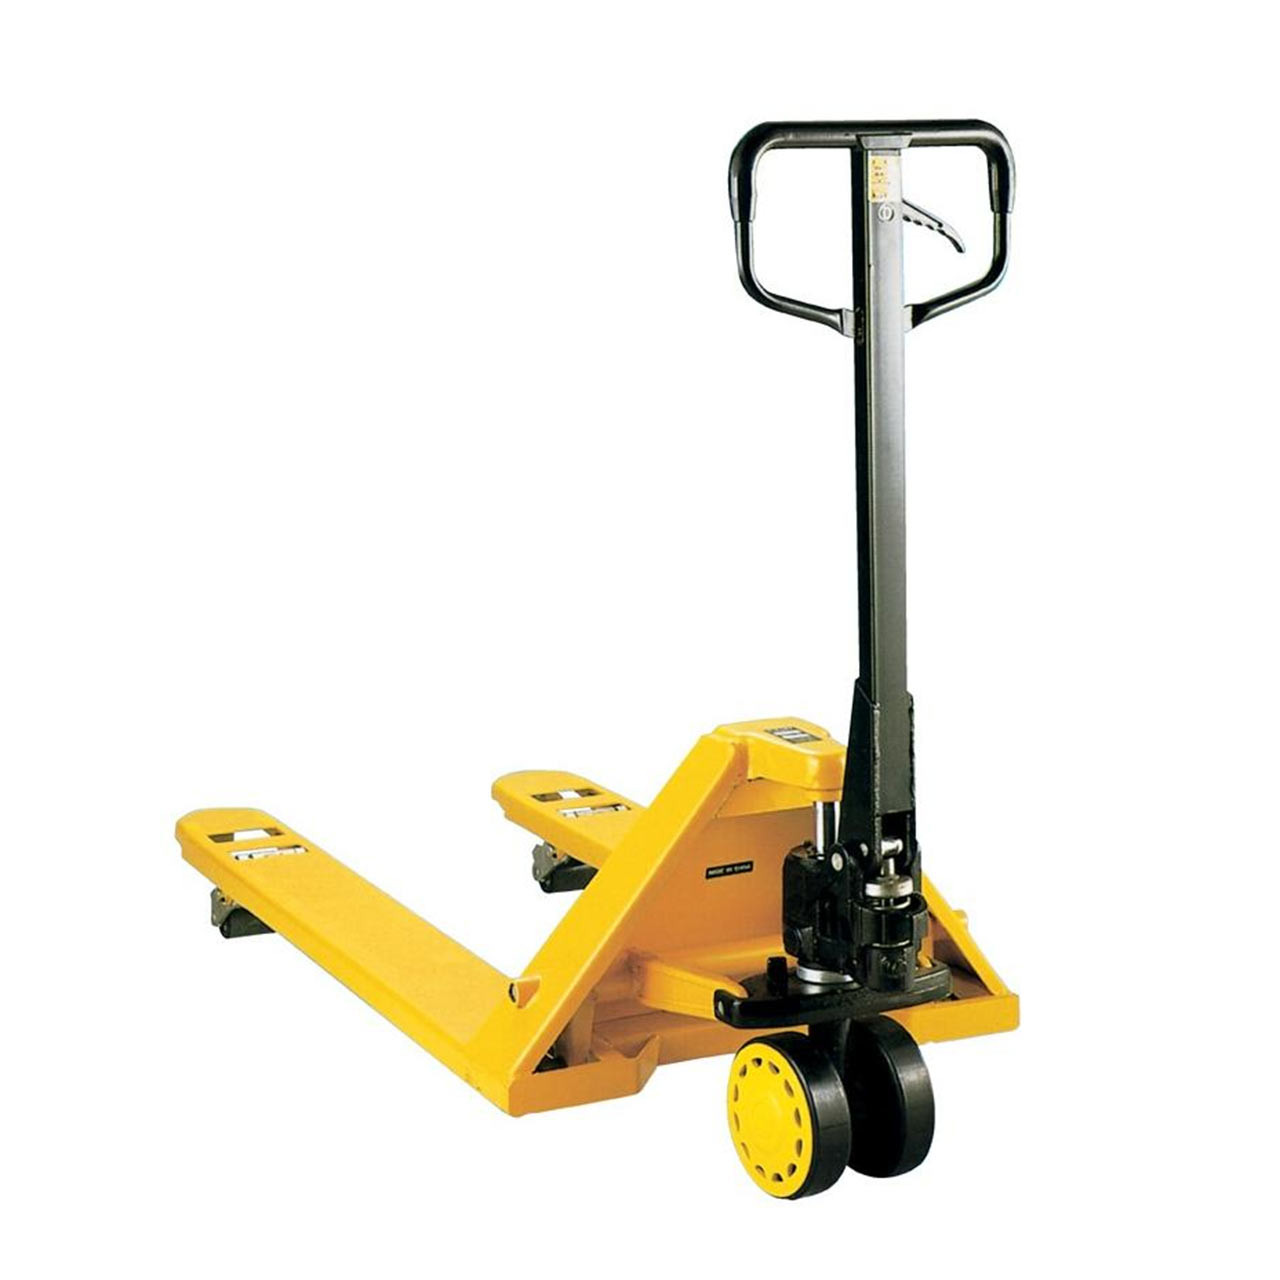 This  27" width standard pallet jack is strong and easy to use